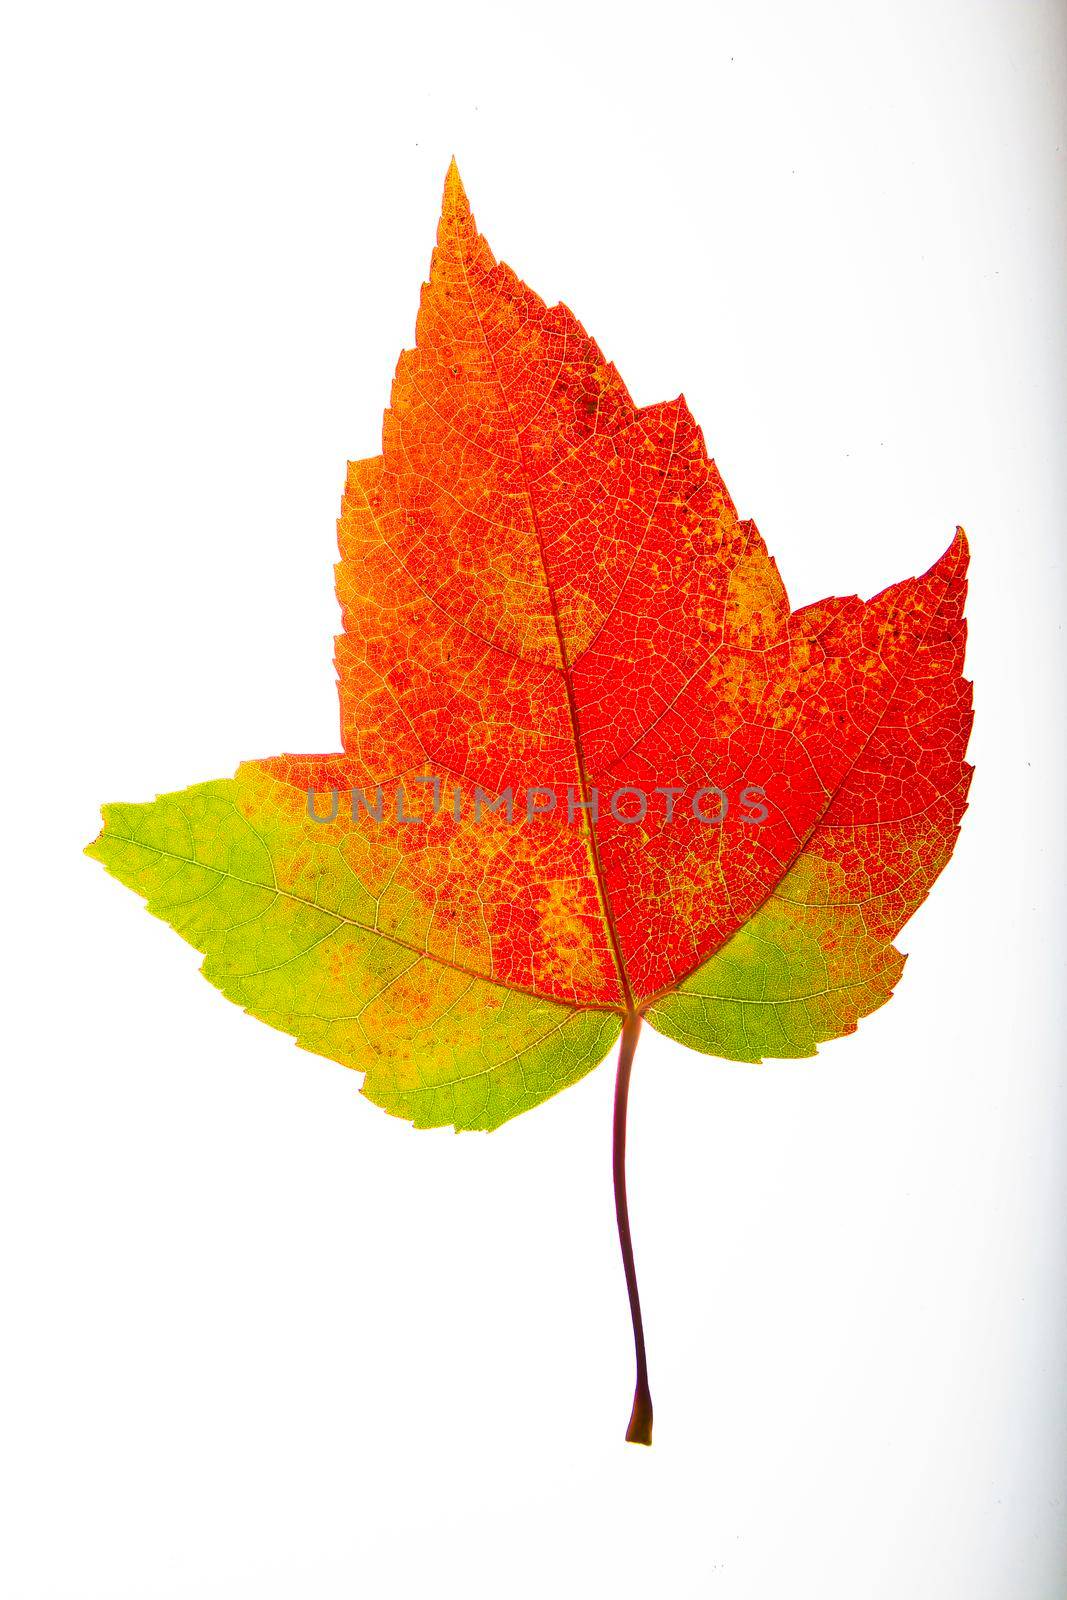 Red and green leaf by mypstudio